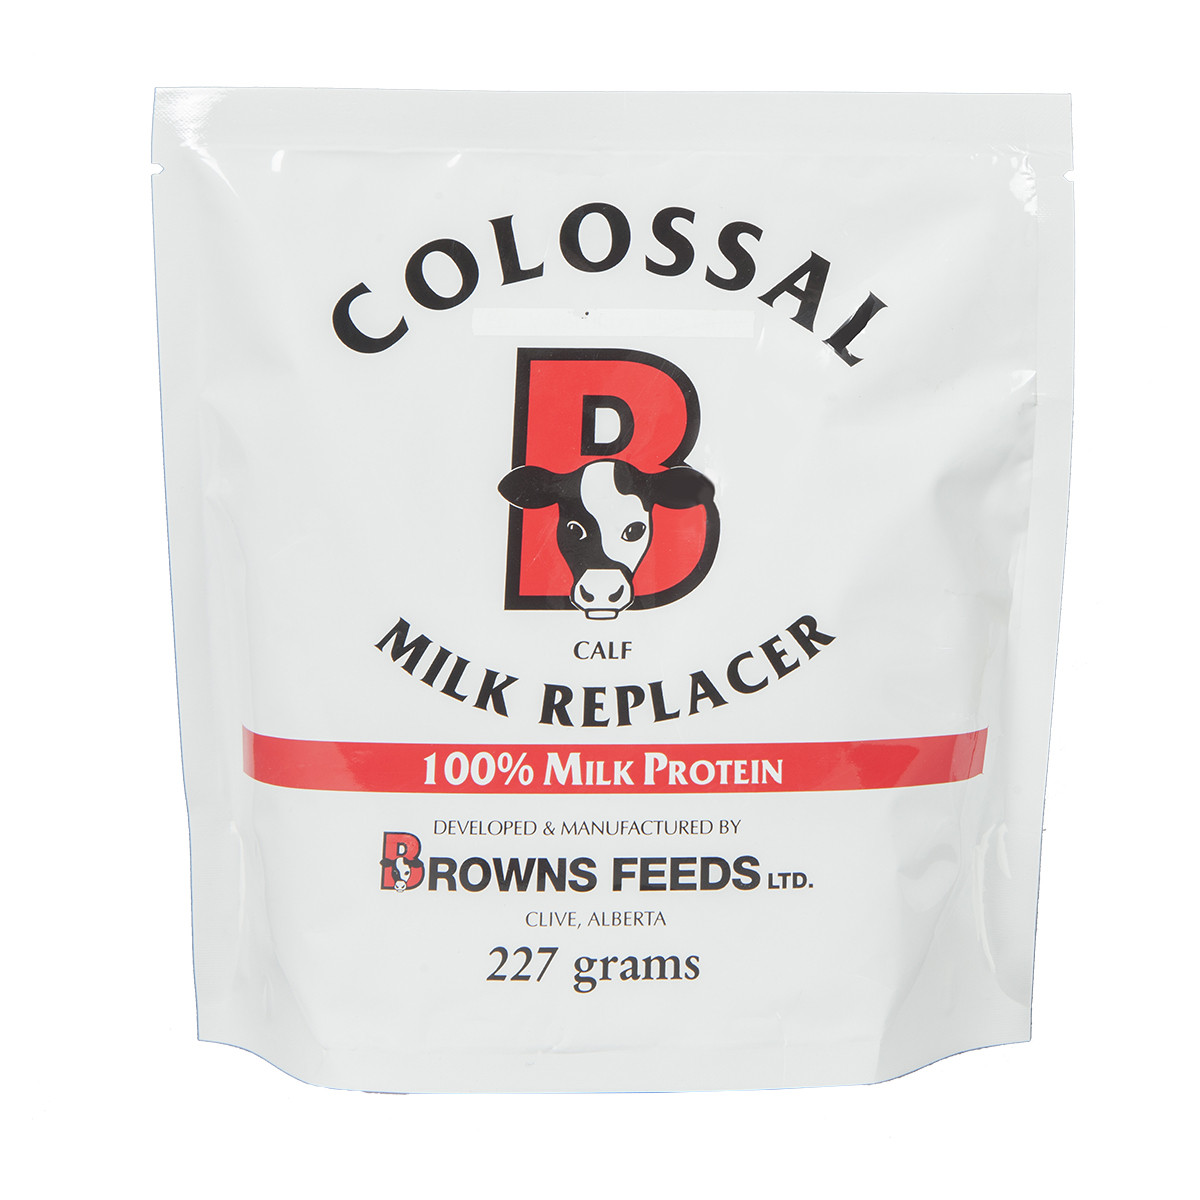 Colossal Milk Replacer 227g